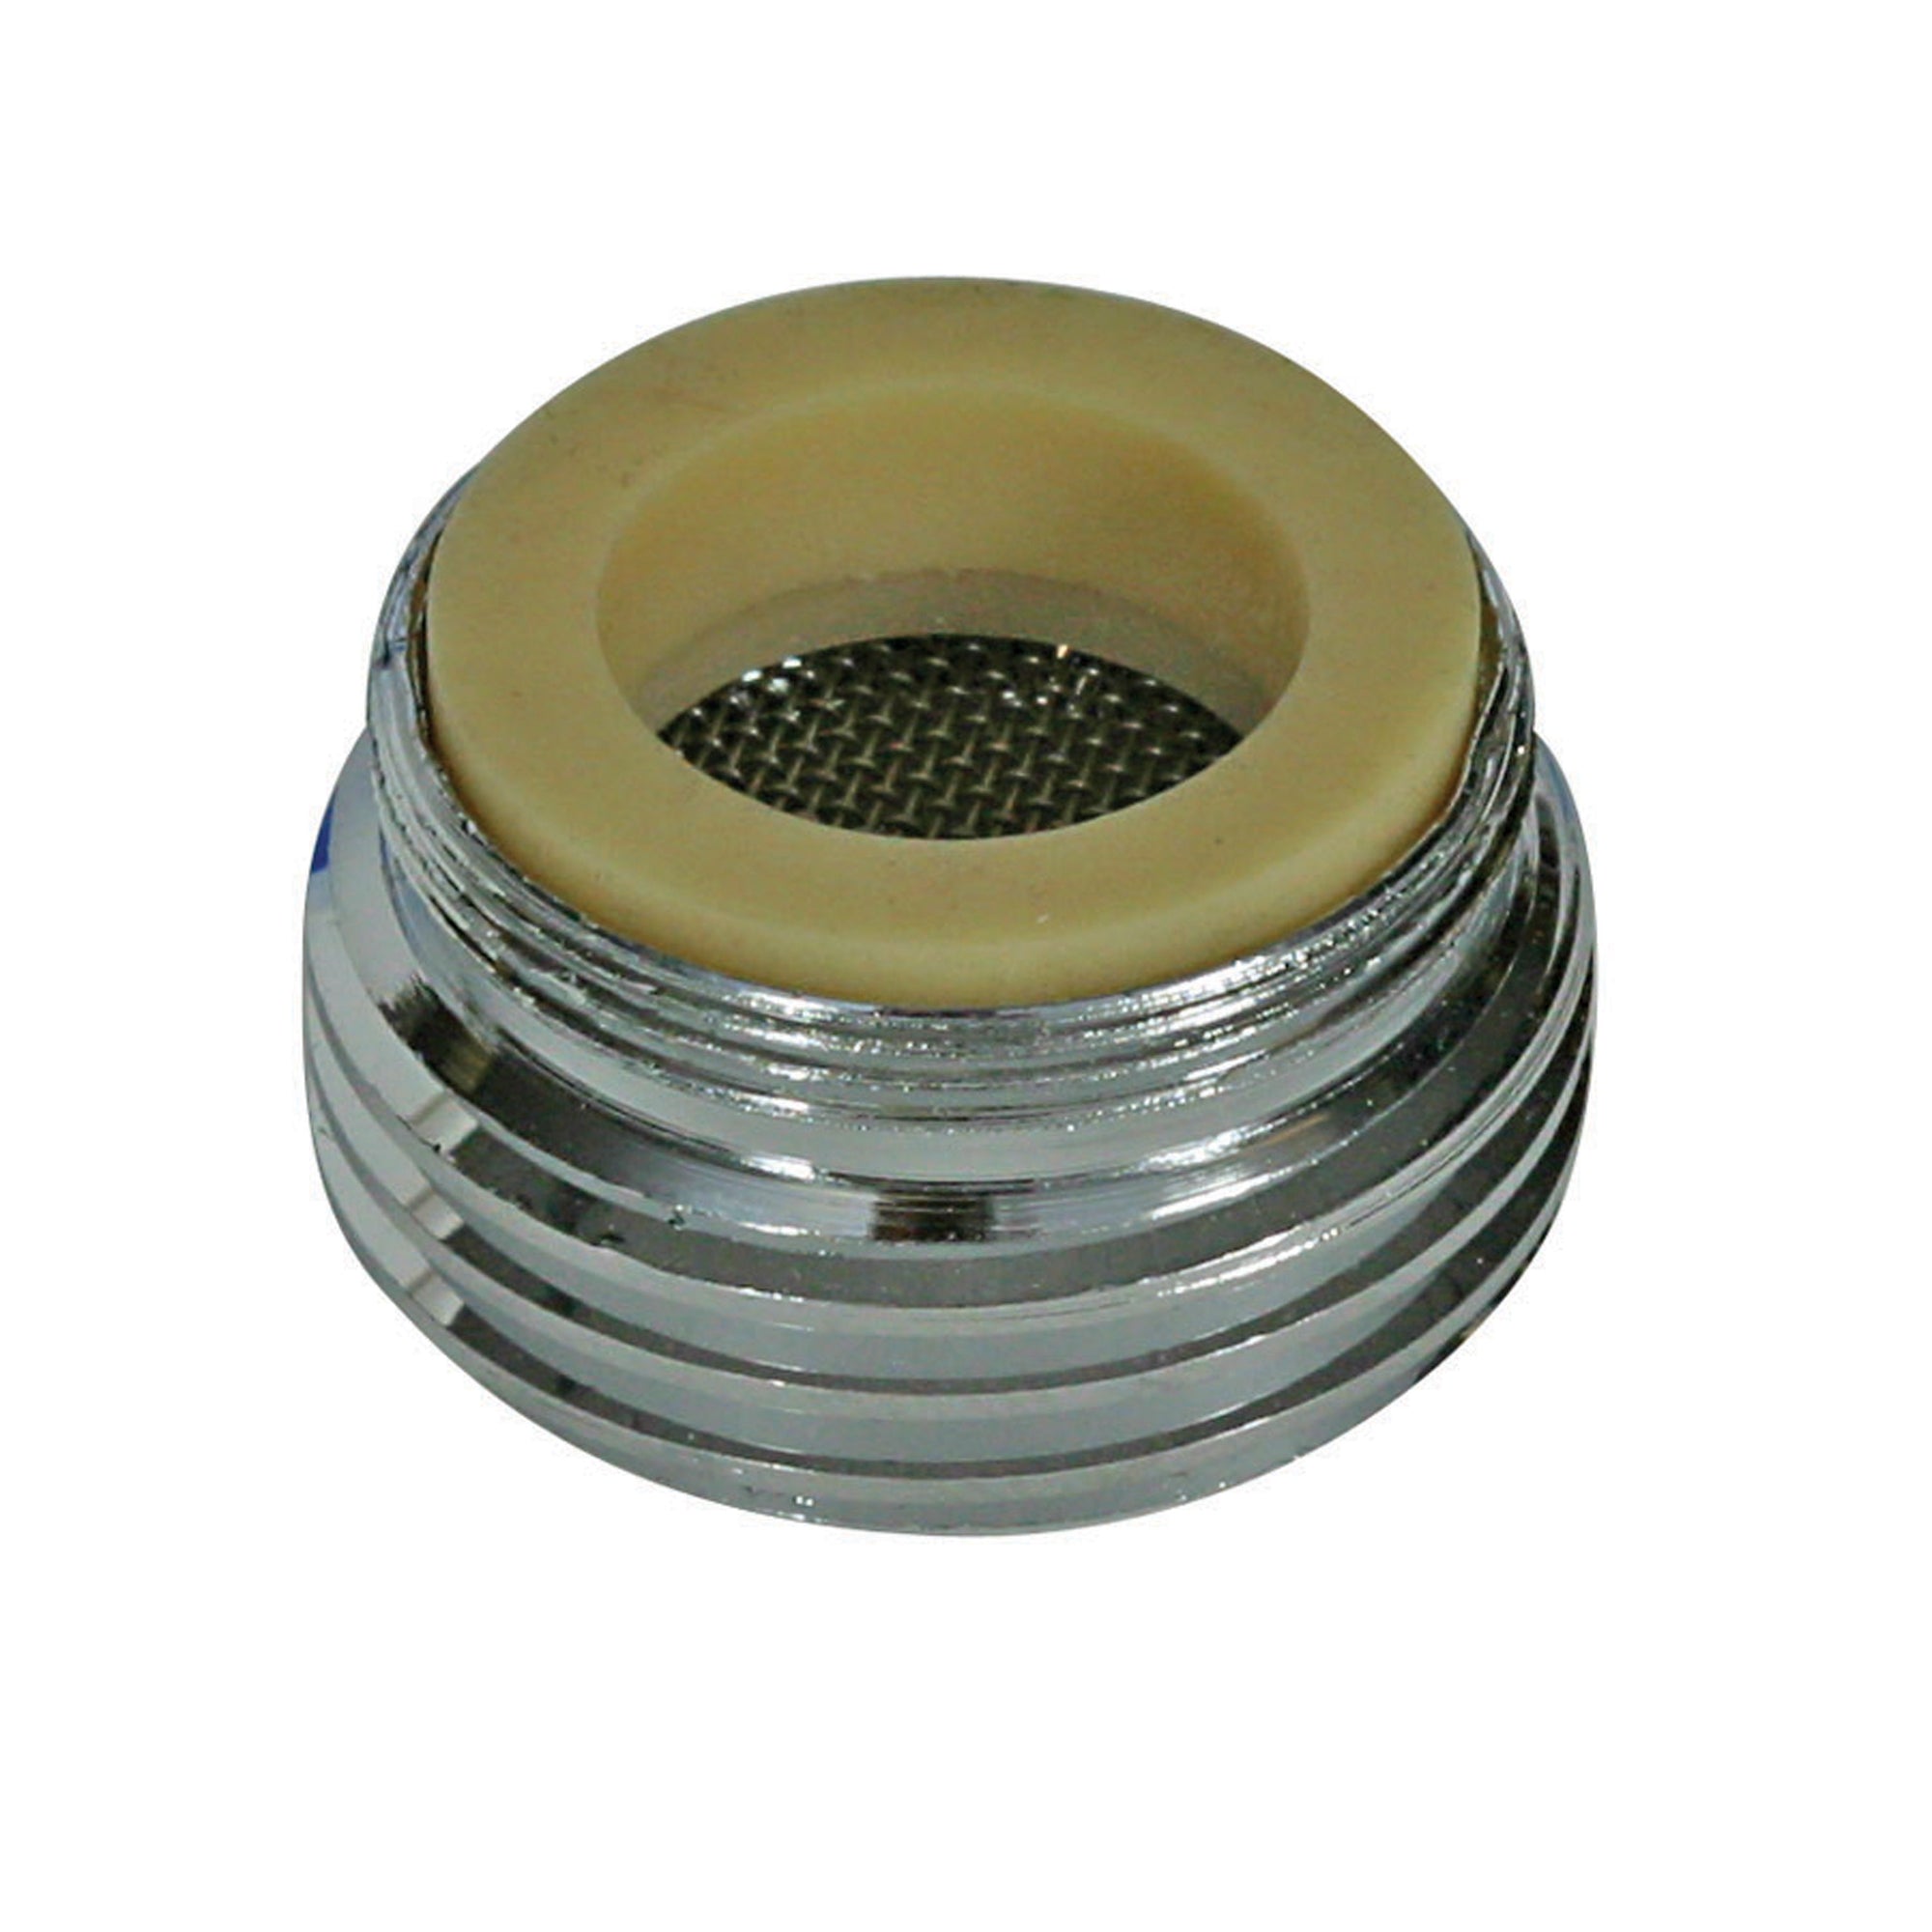 Camco 40083 Faucet Adapter